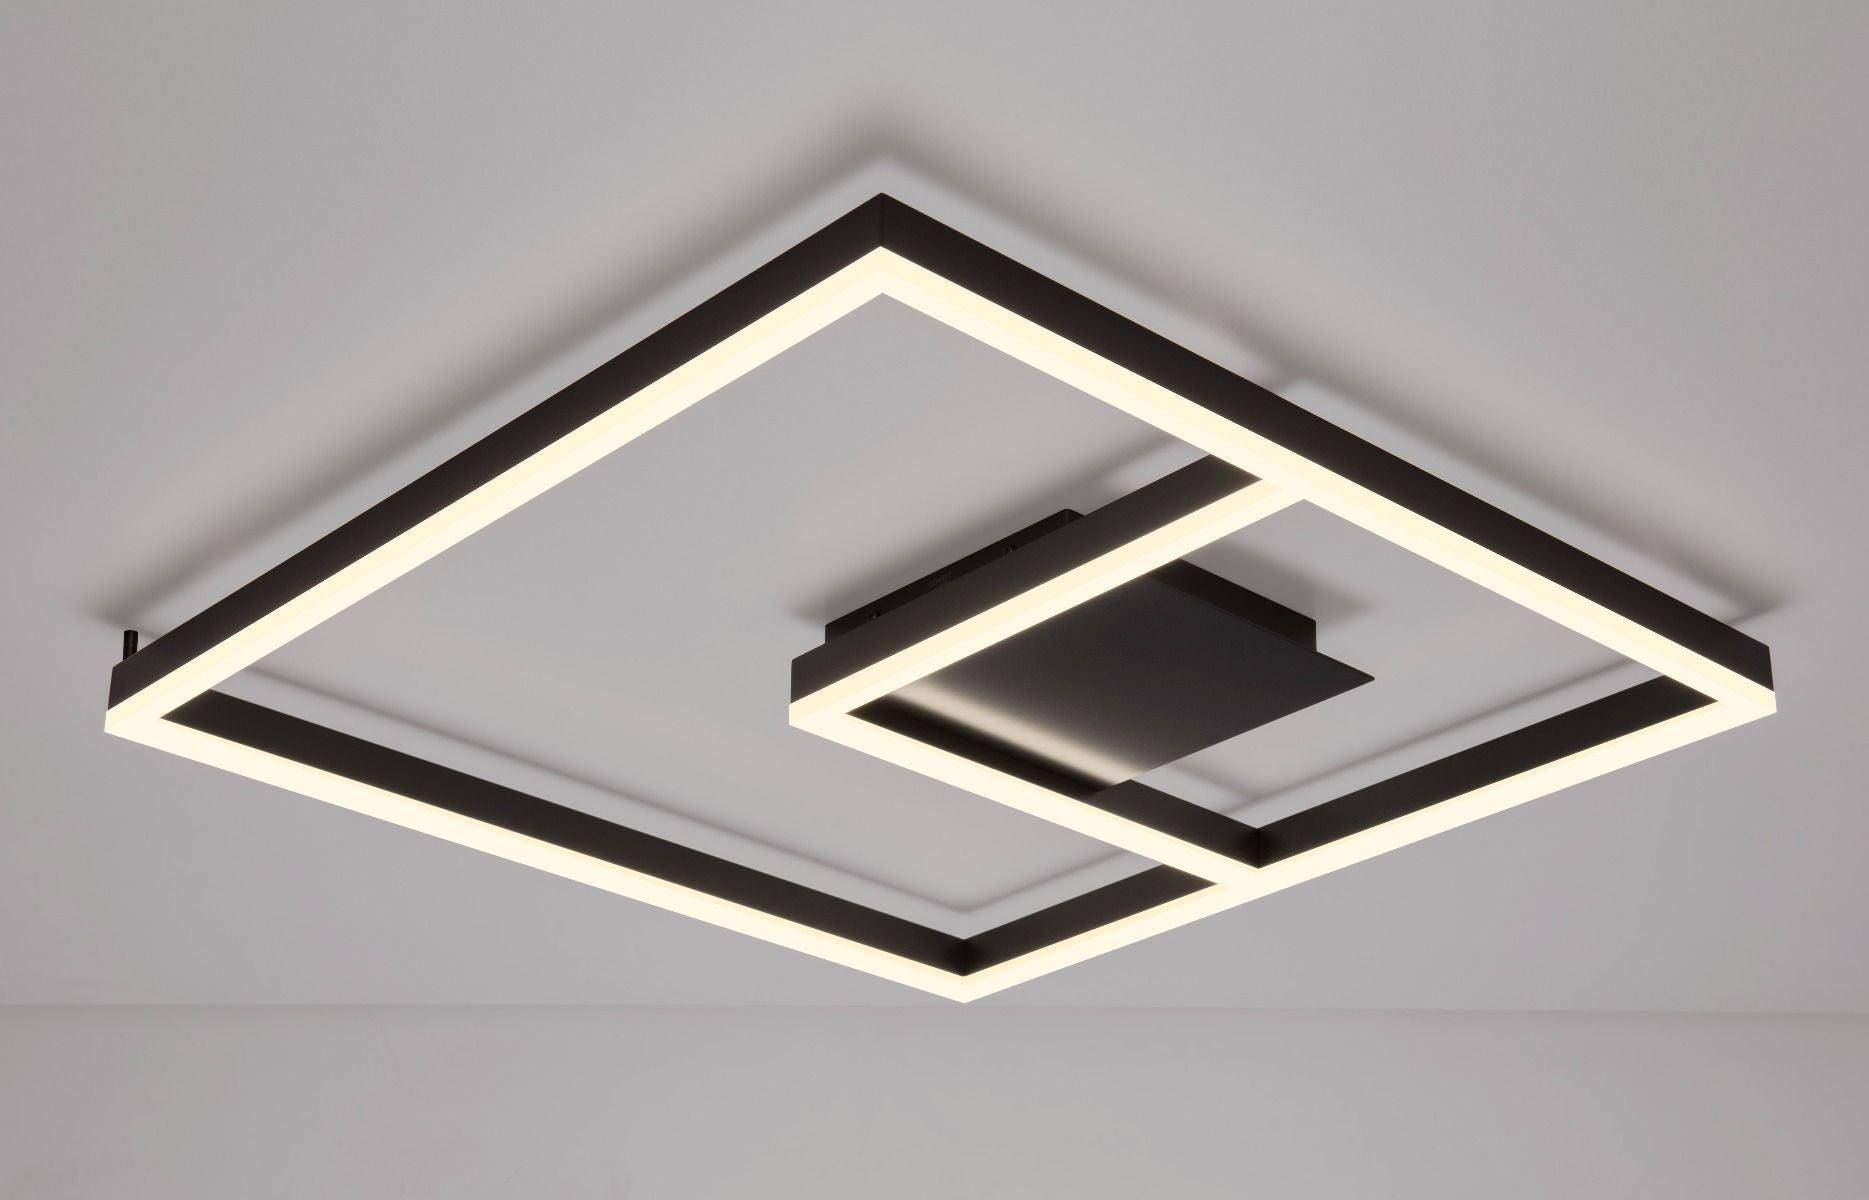 Pageone - Symmetry 23.6"L. Ceiling - Hbdepot